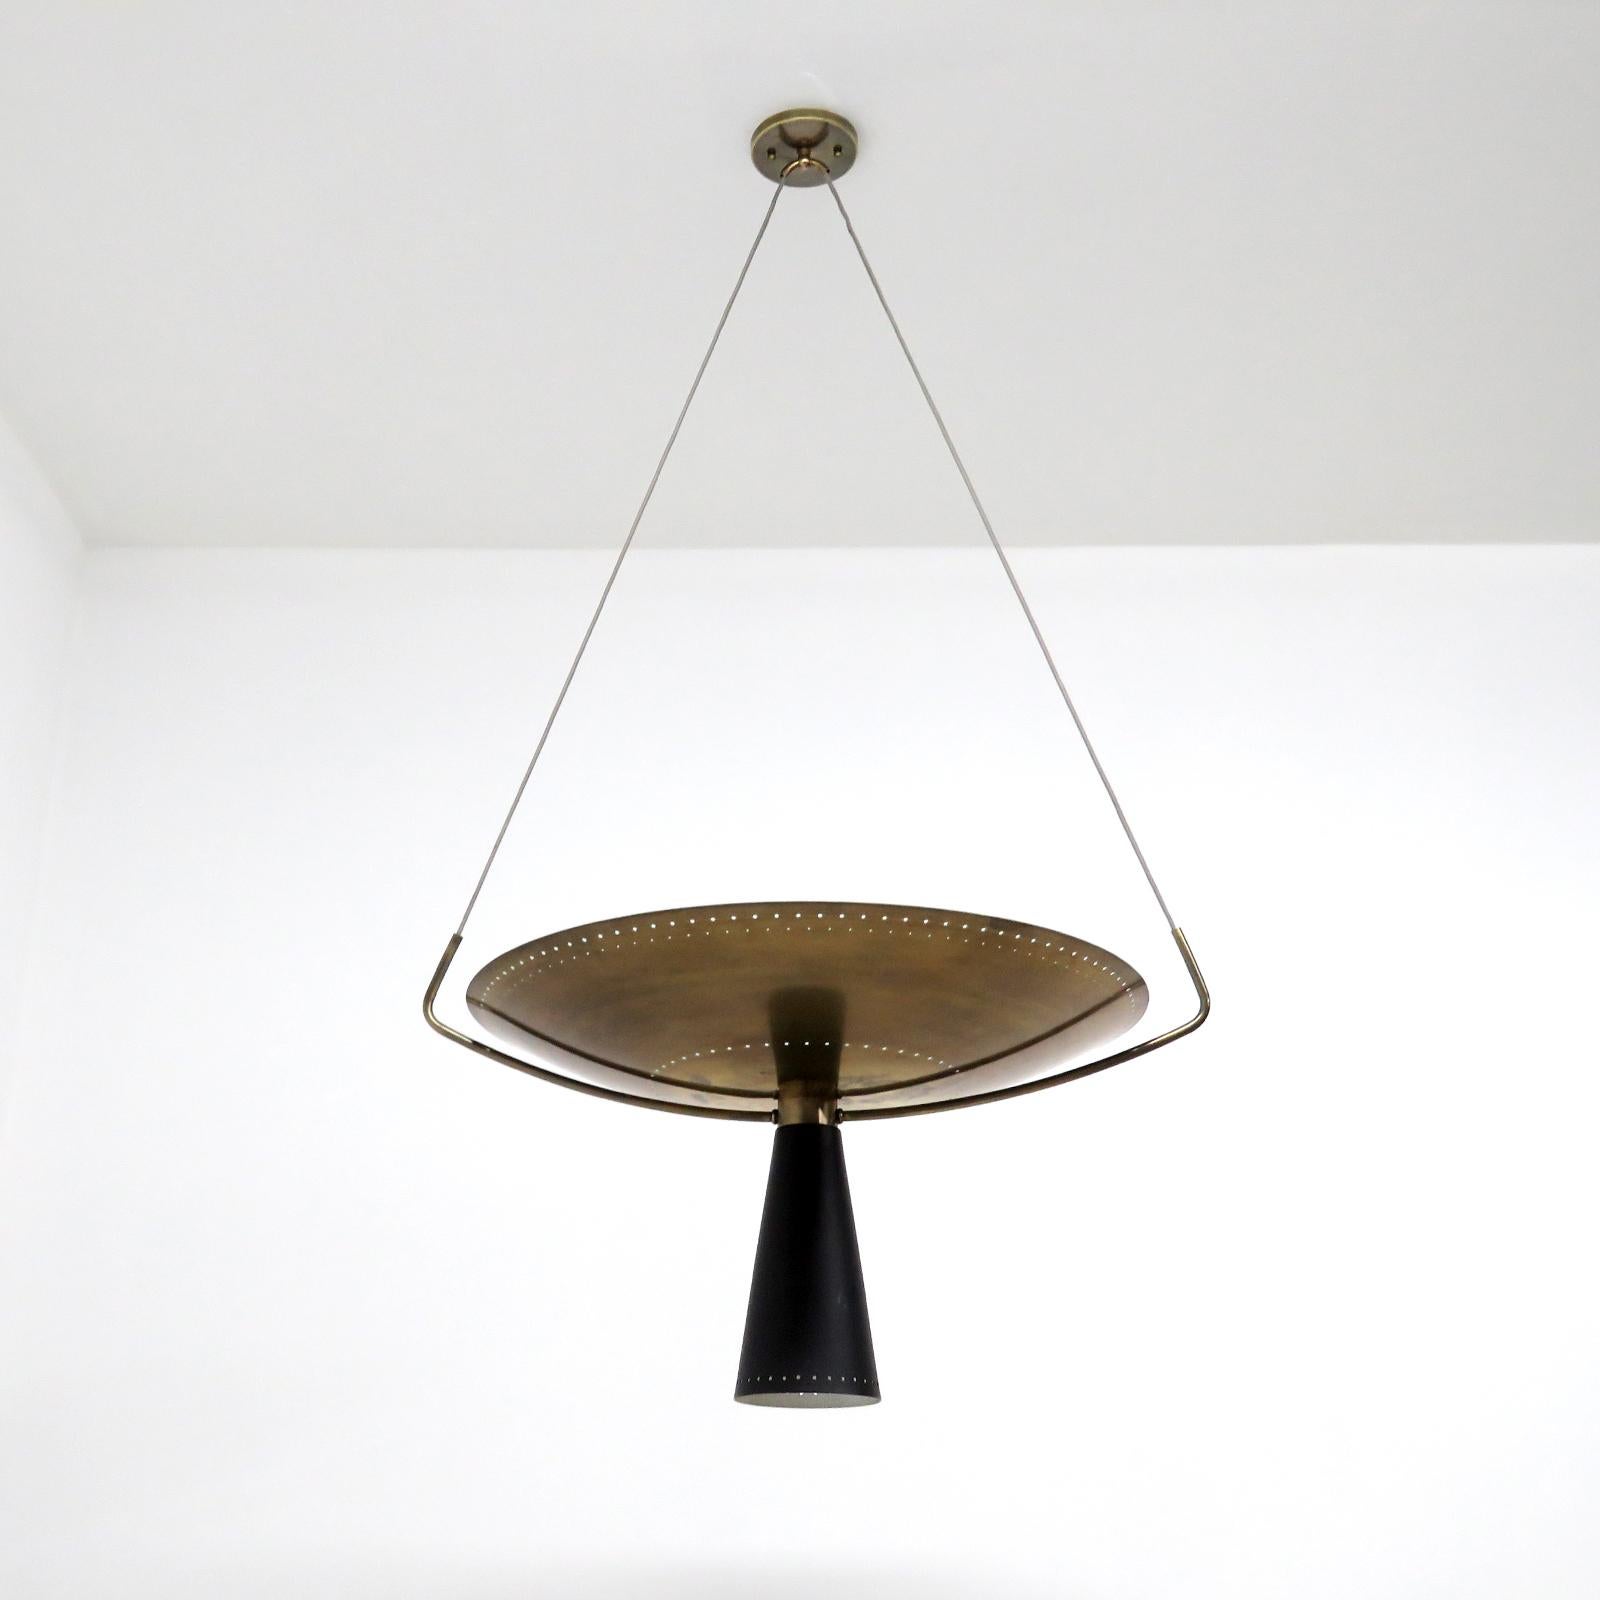 Wonderful two tone pendant light Calice-24 designed by Gallery L7, handcrafted and finished in Los Angeles from American brass, suspended with a perforated, aged brass up-light disc and a black enameled down-light cone. Four E26 sockets per fixture,